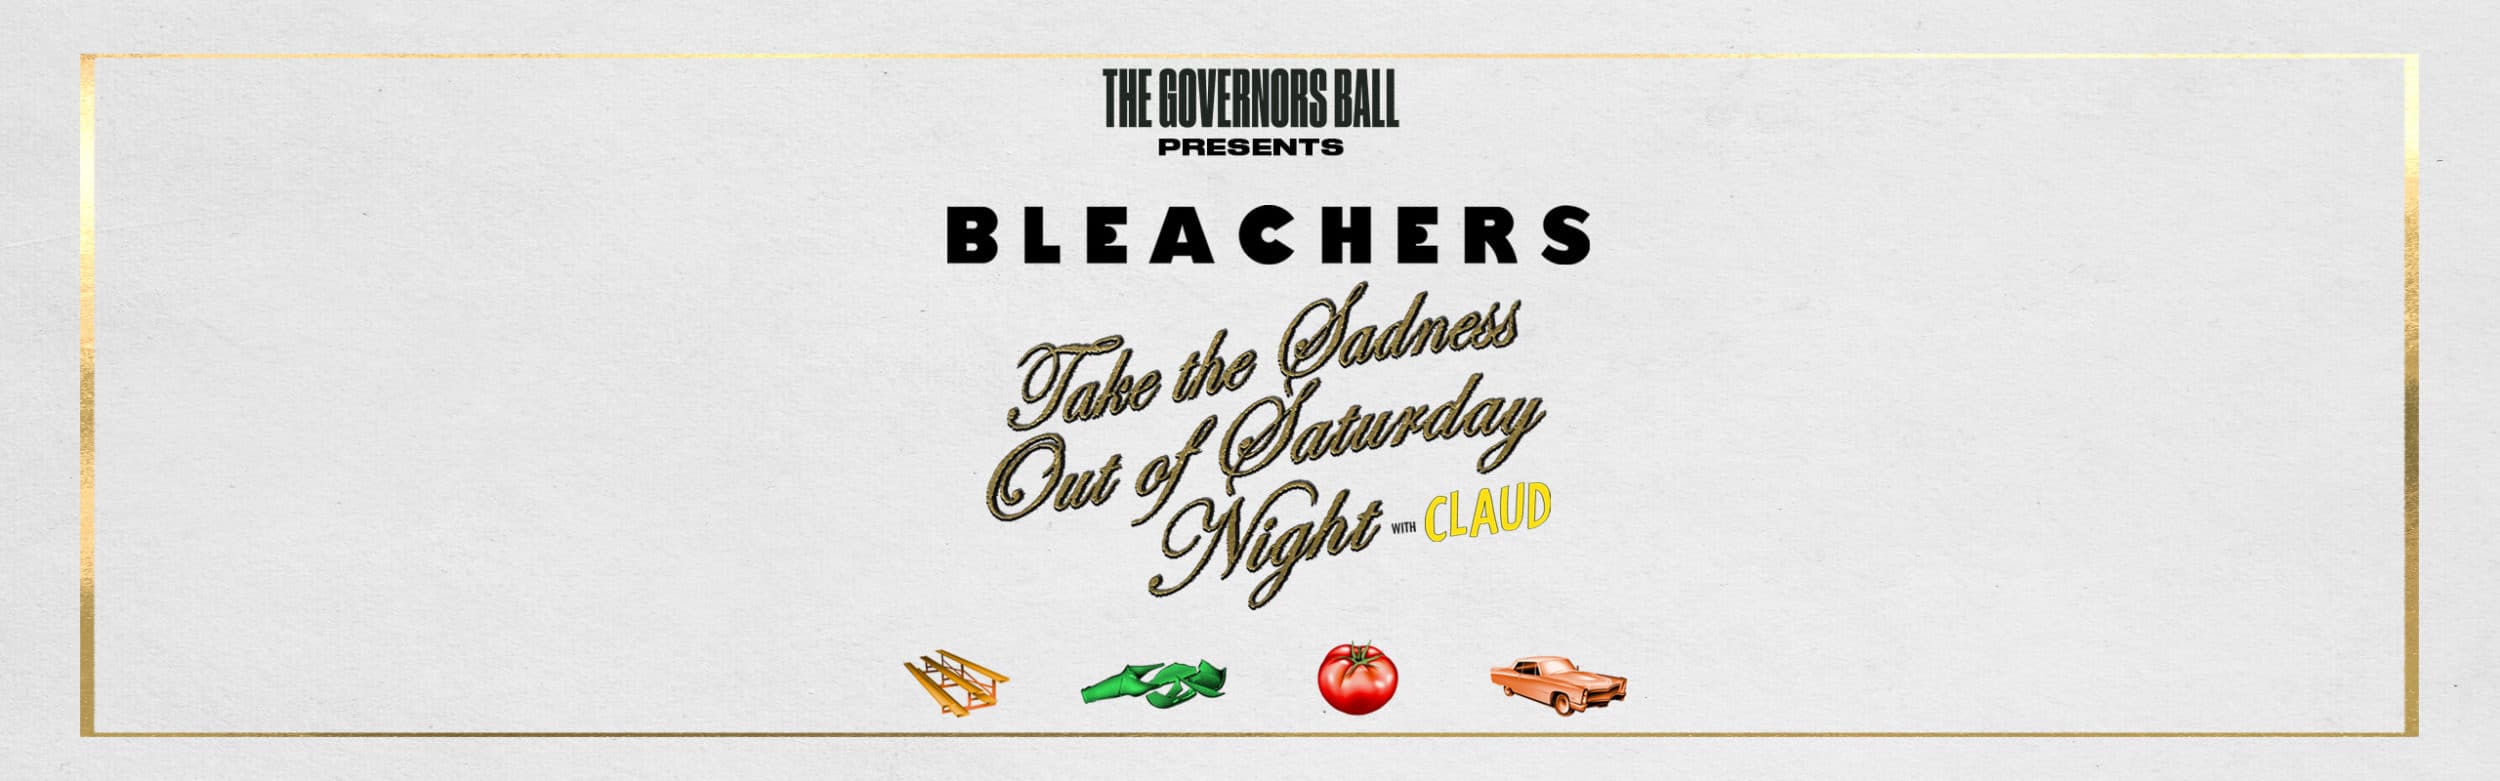 The Governors Ball Presents Bleachers